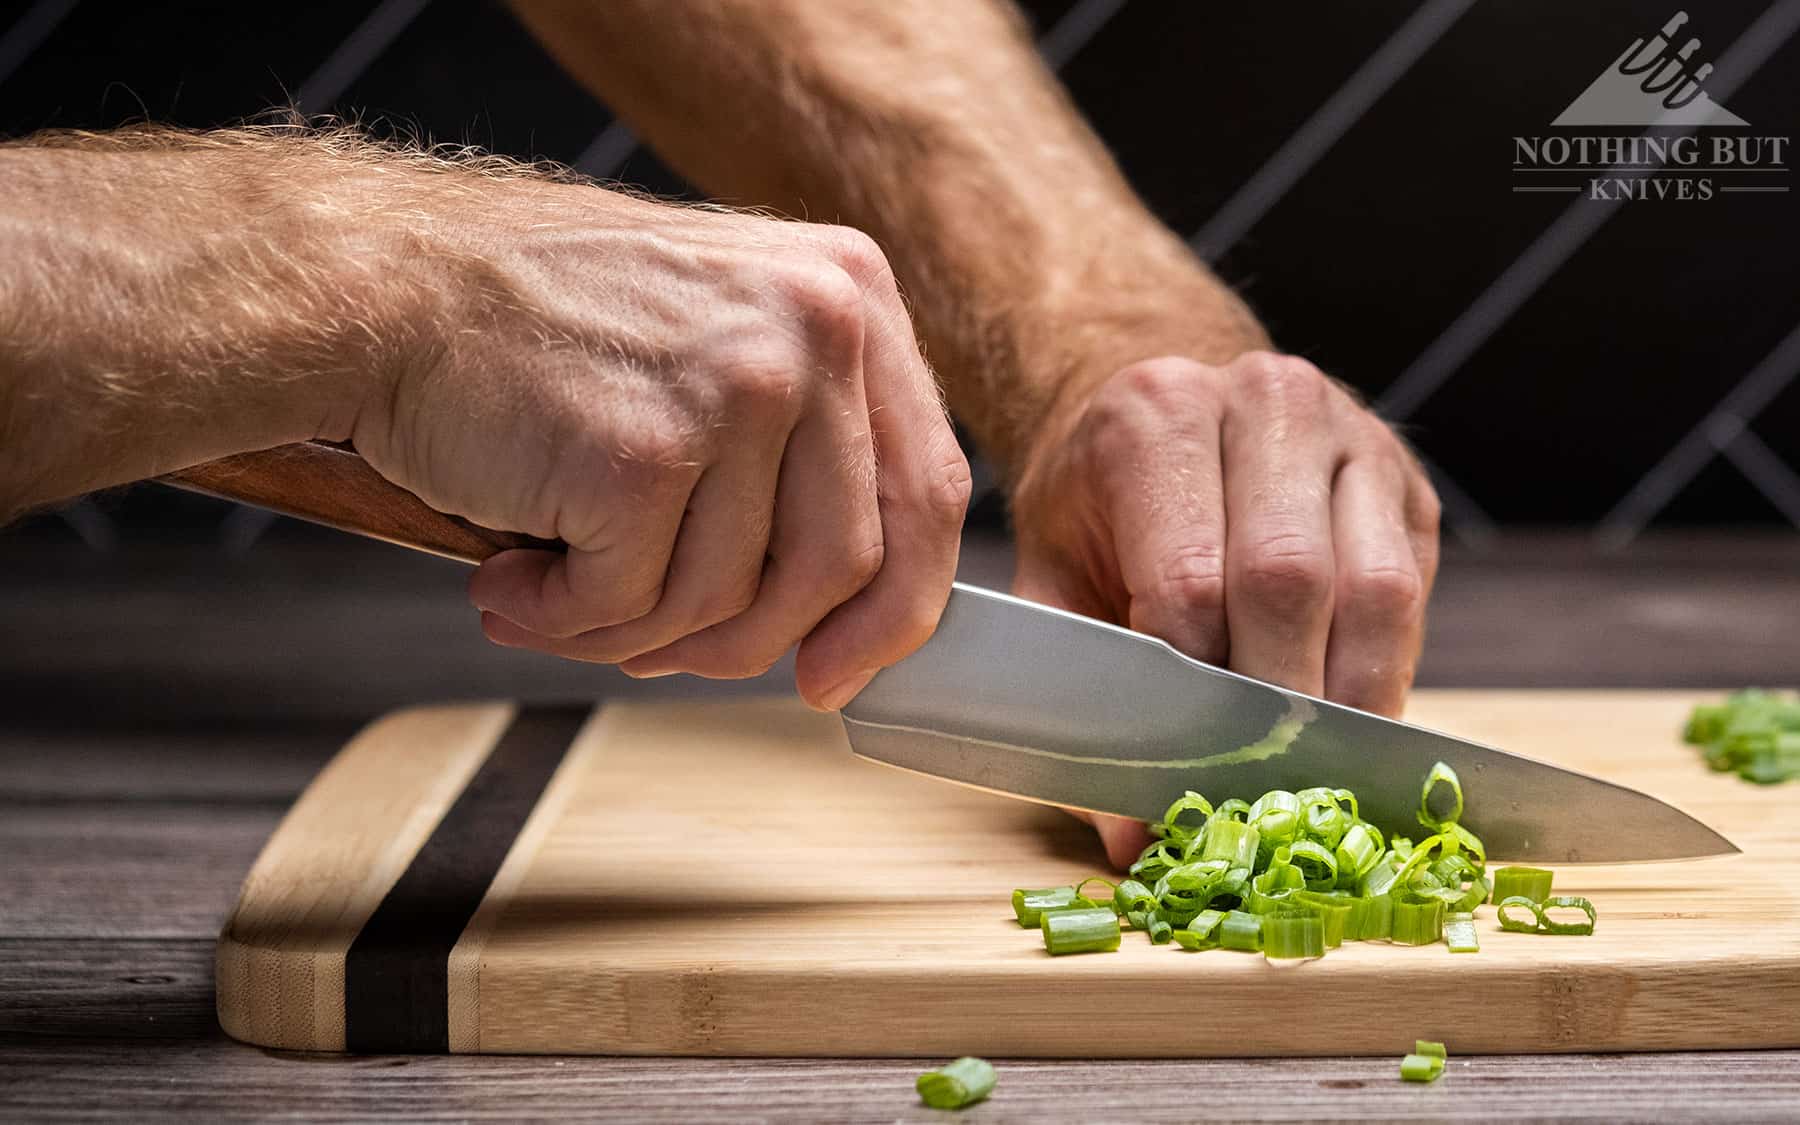 The Xin Cutlery XinCraft knife is great for detail work like dicing green onions. 